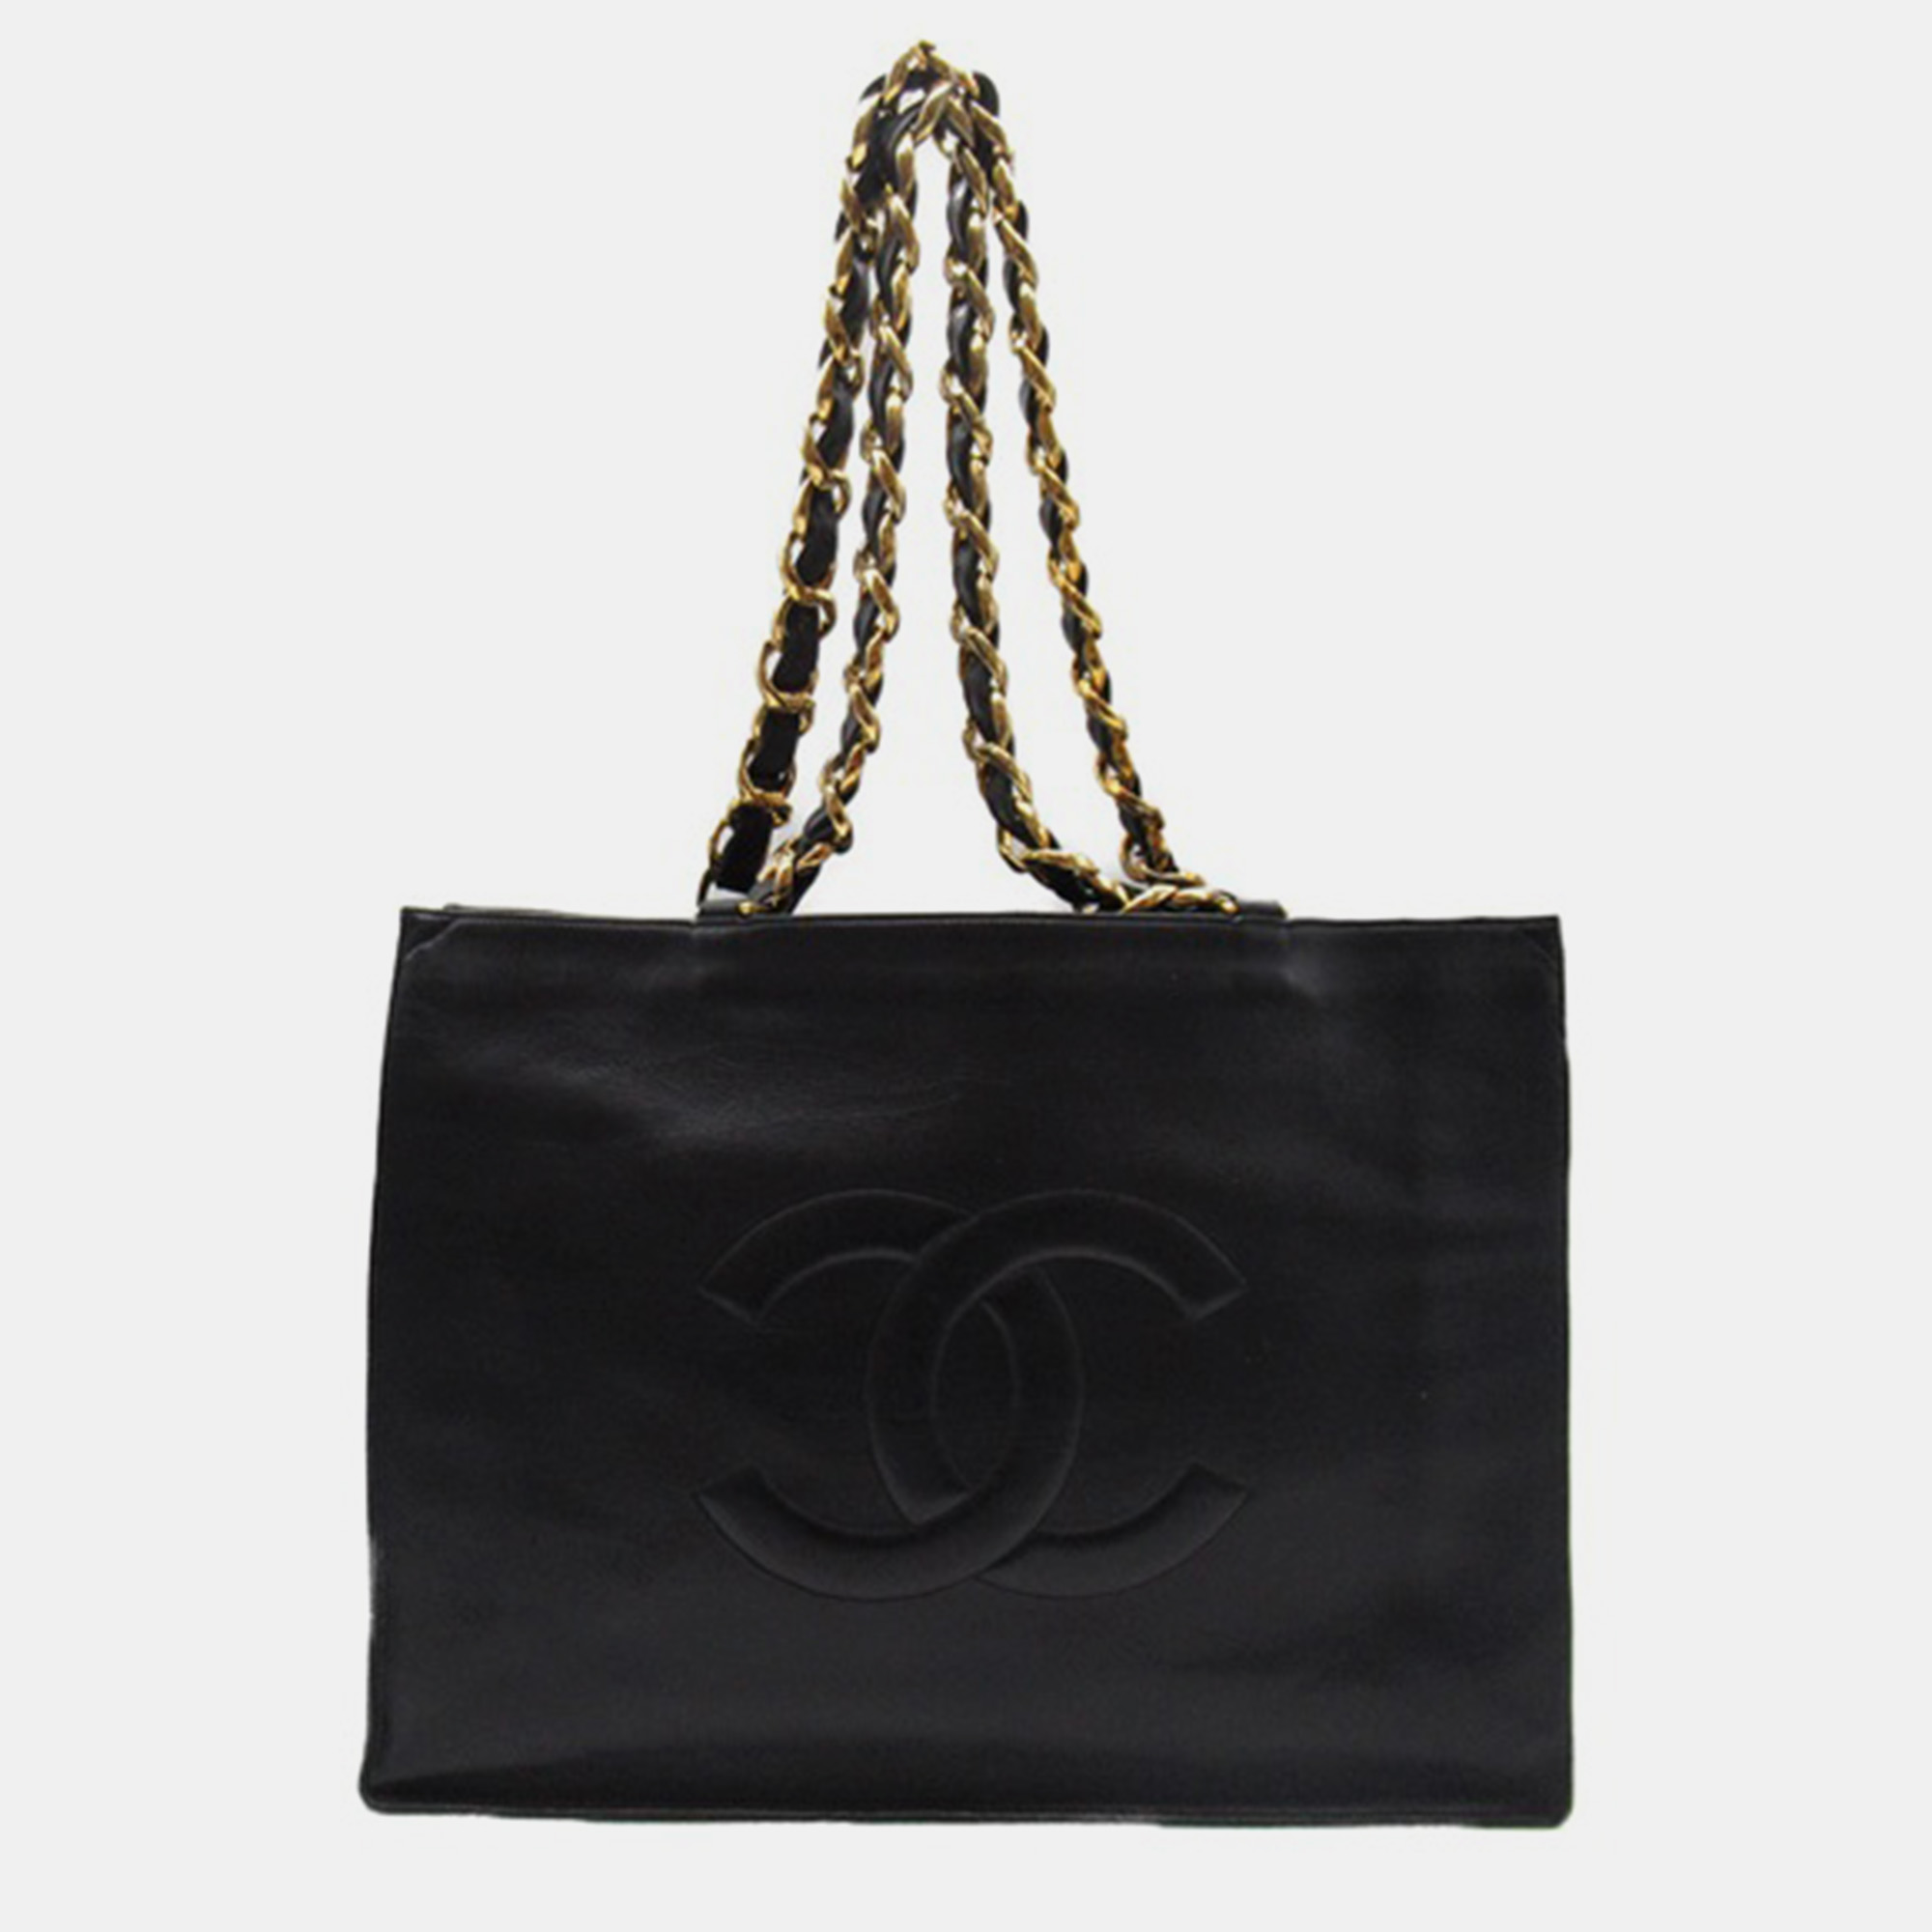 

Chanel Black Leather CC Leather Chain Tote Bag